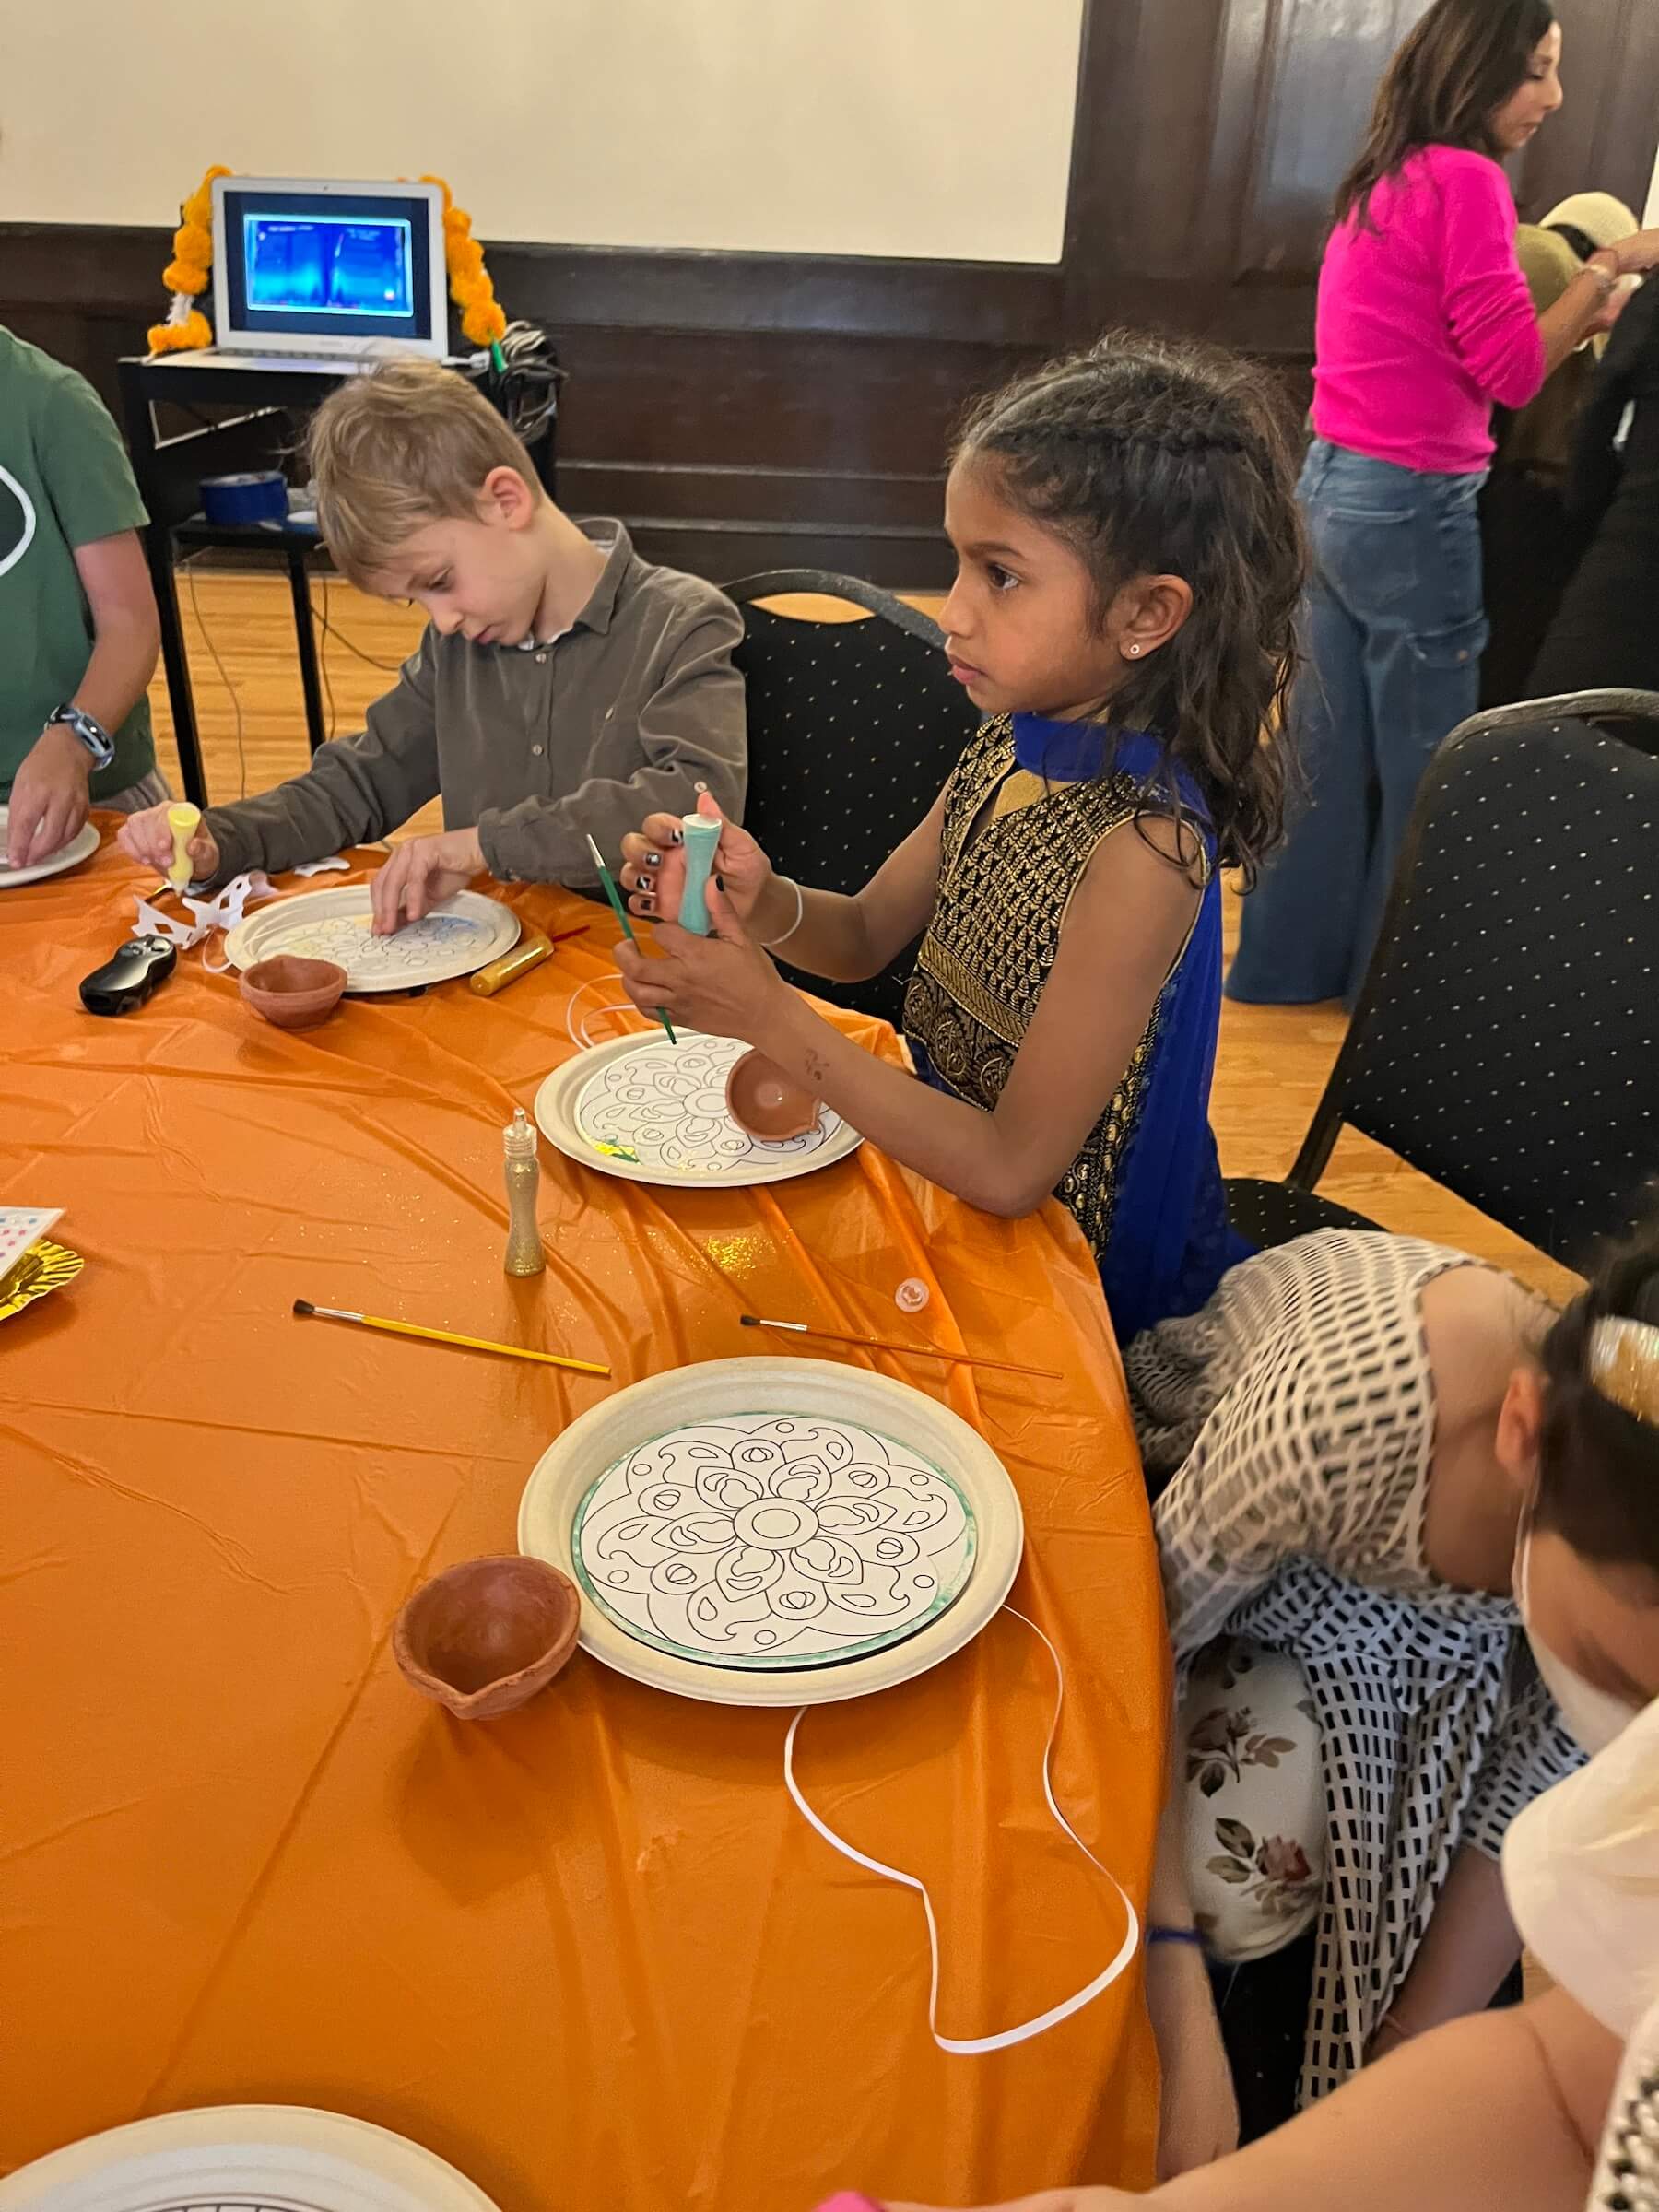 Ethical Culture Fieldston School_Feel Good Photos_Ethical Culture students work on Diwali crafts during holiday celebration